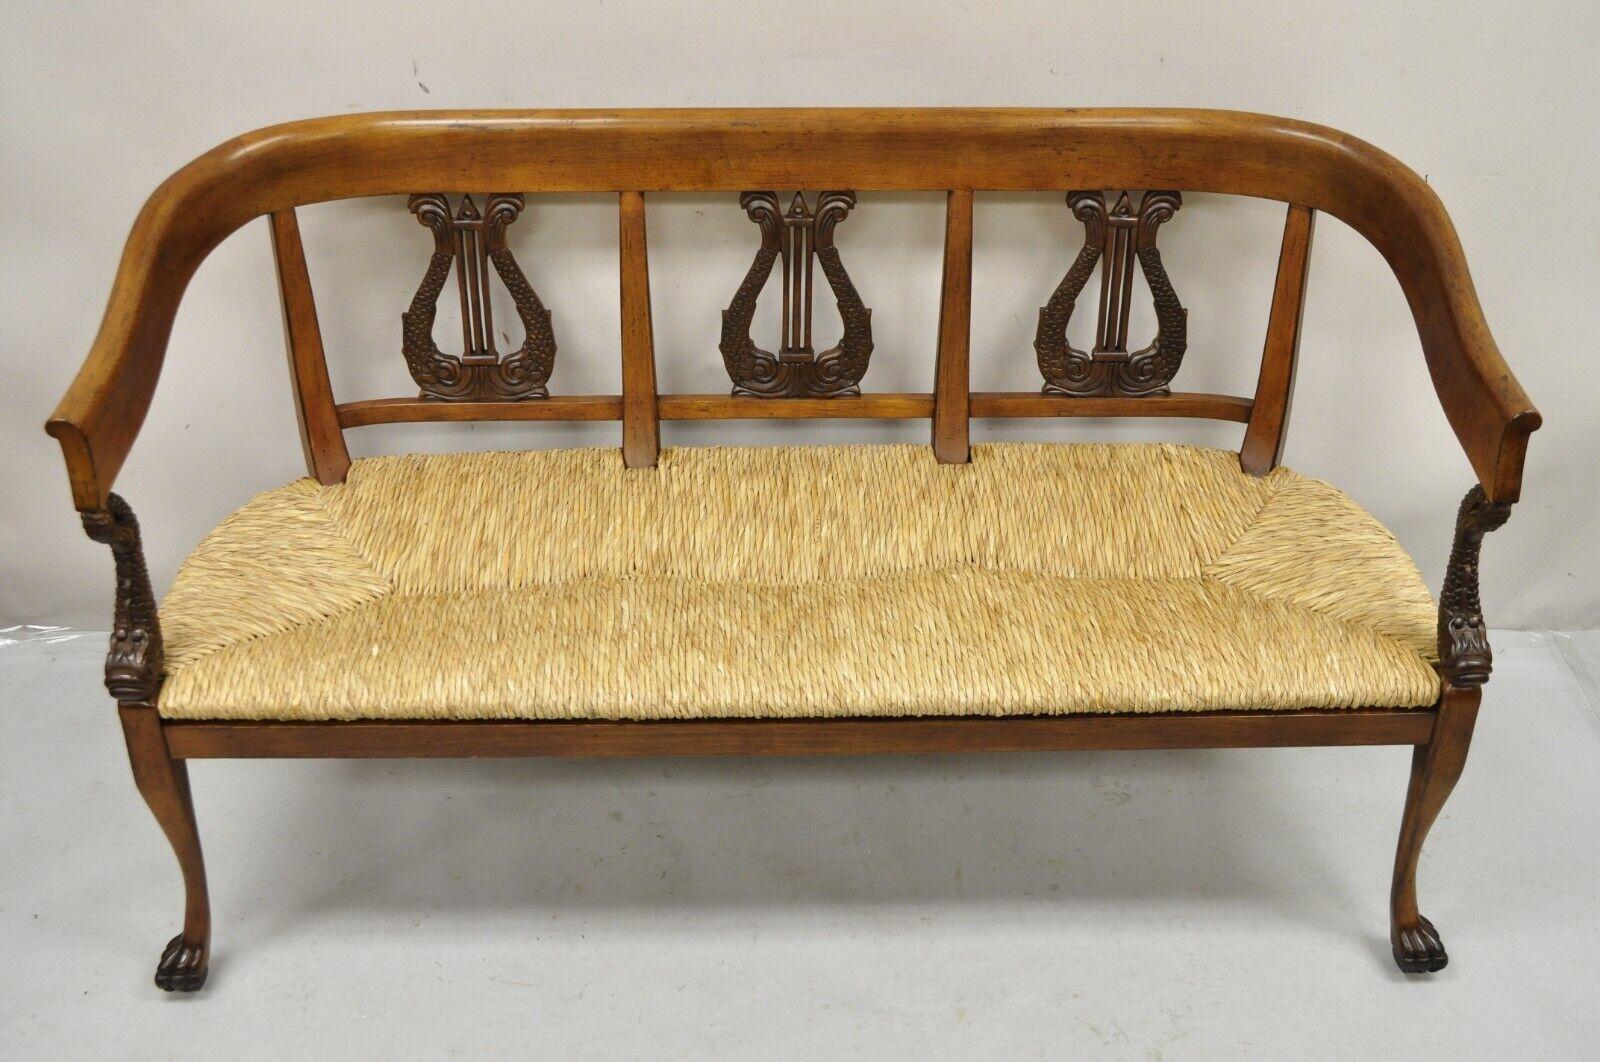 Vintage Italian Neoclassical Regency Style Serpent Lyre Carved Rush Seat Bench For Sale 3